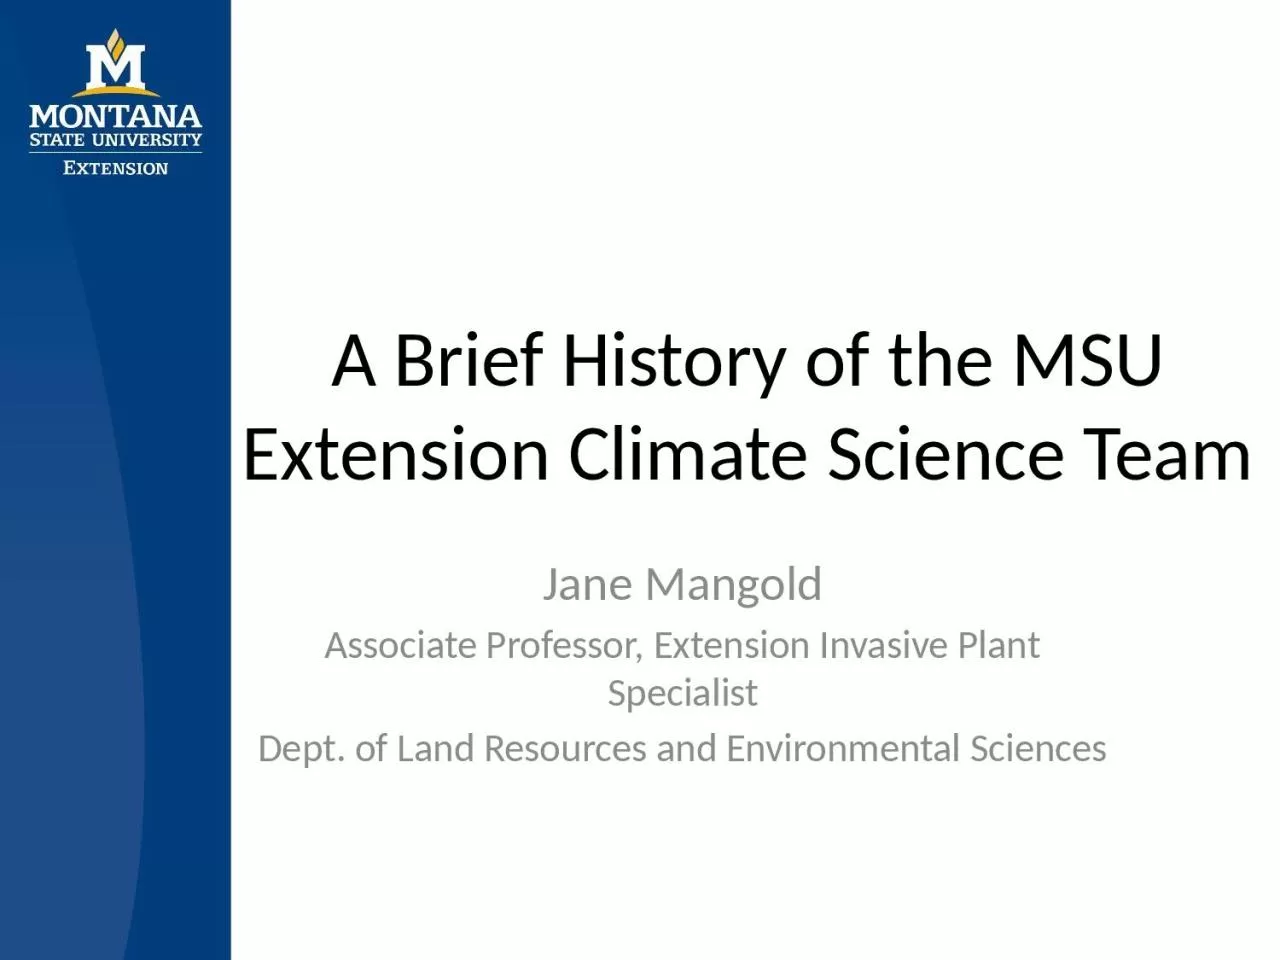 A Brief History of the MSU Extension Climate Science Team